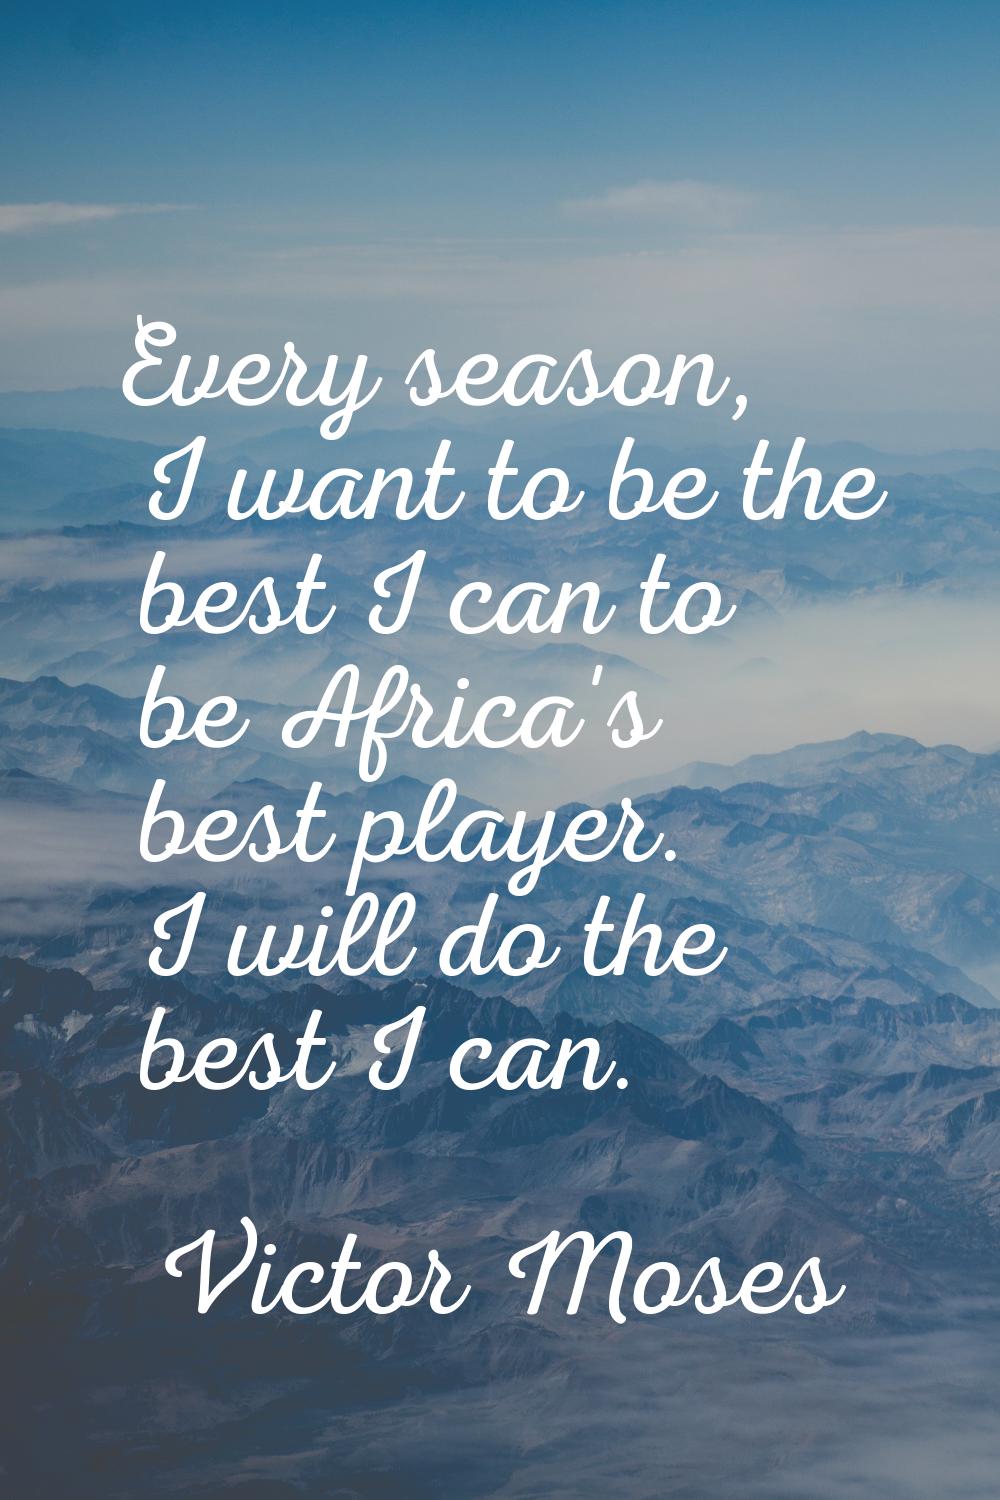 Every season, I want to be the best I can to be Africa's best player. I will do the best I can.